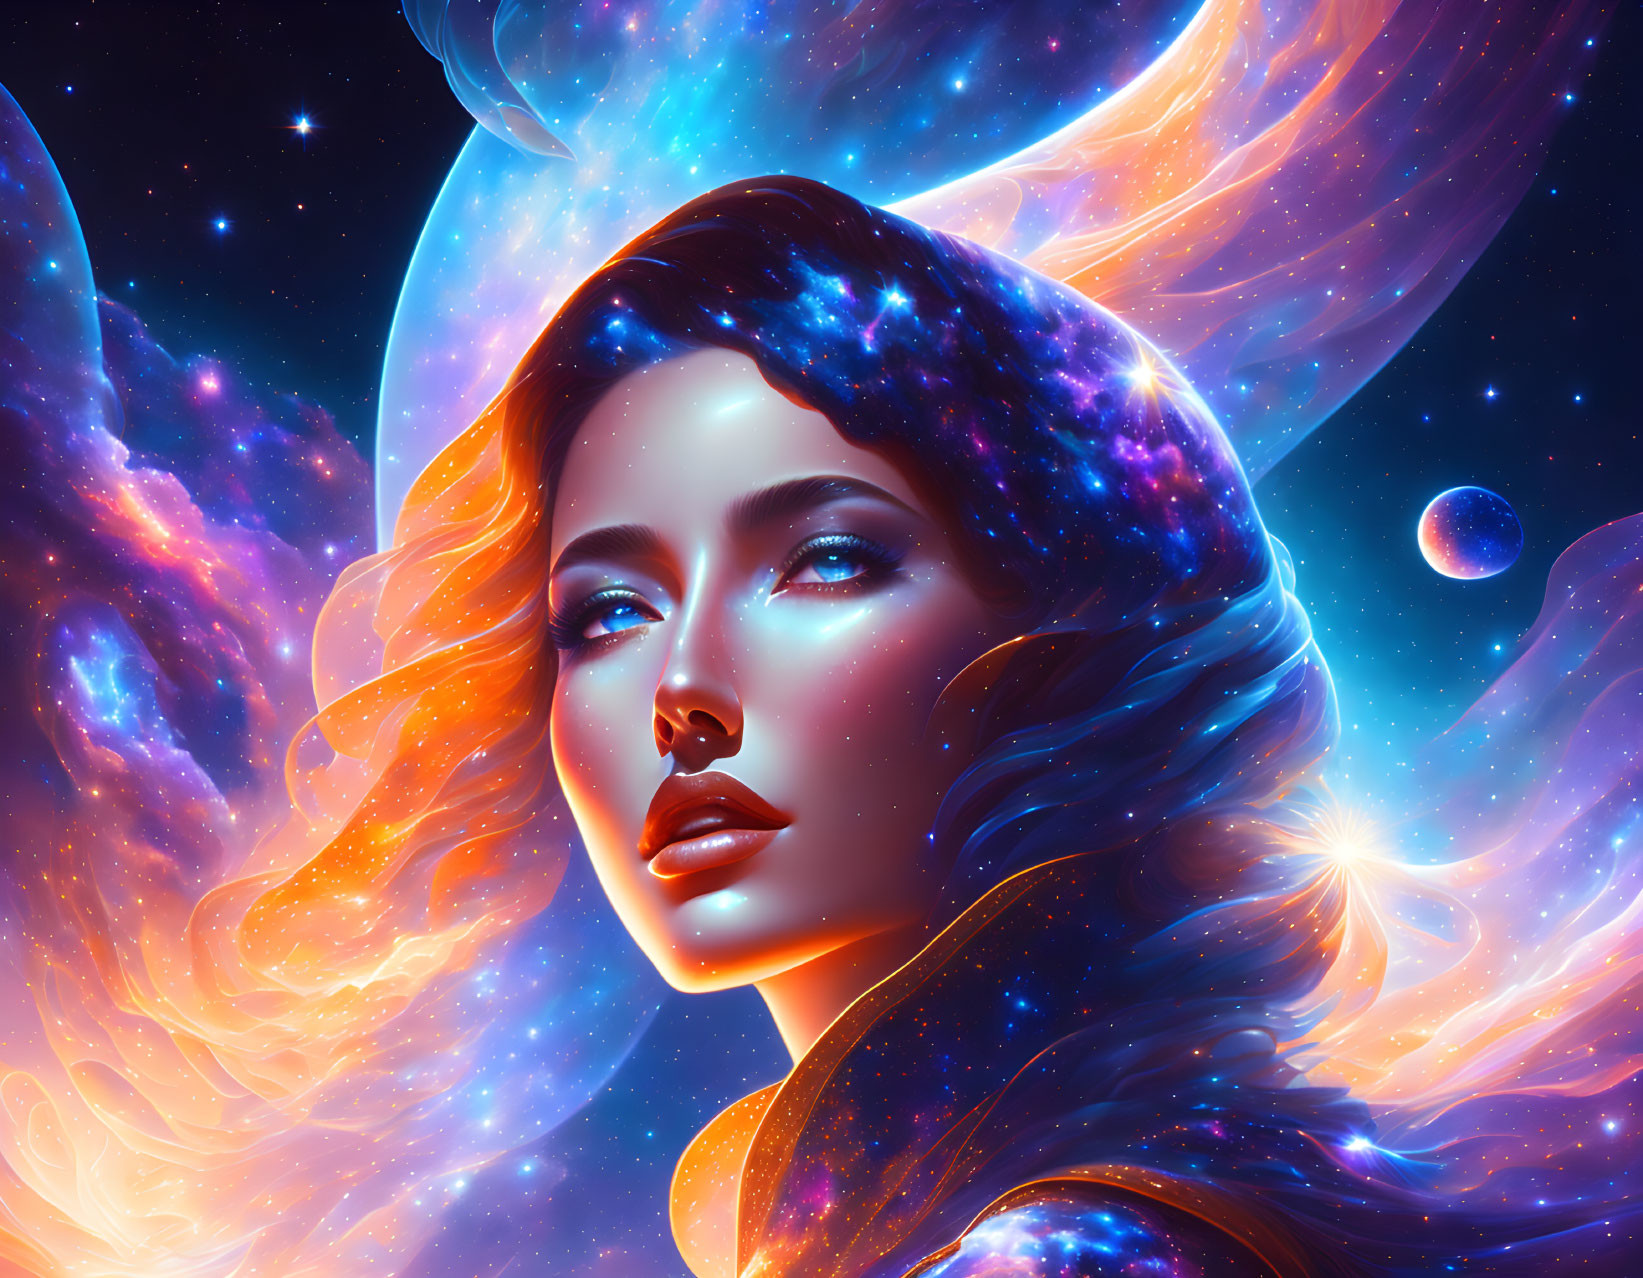 Vibrant cosmic digital artwork of woman's face blending with space